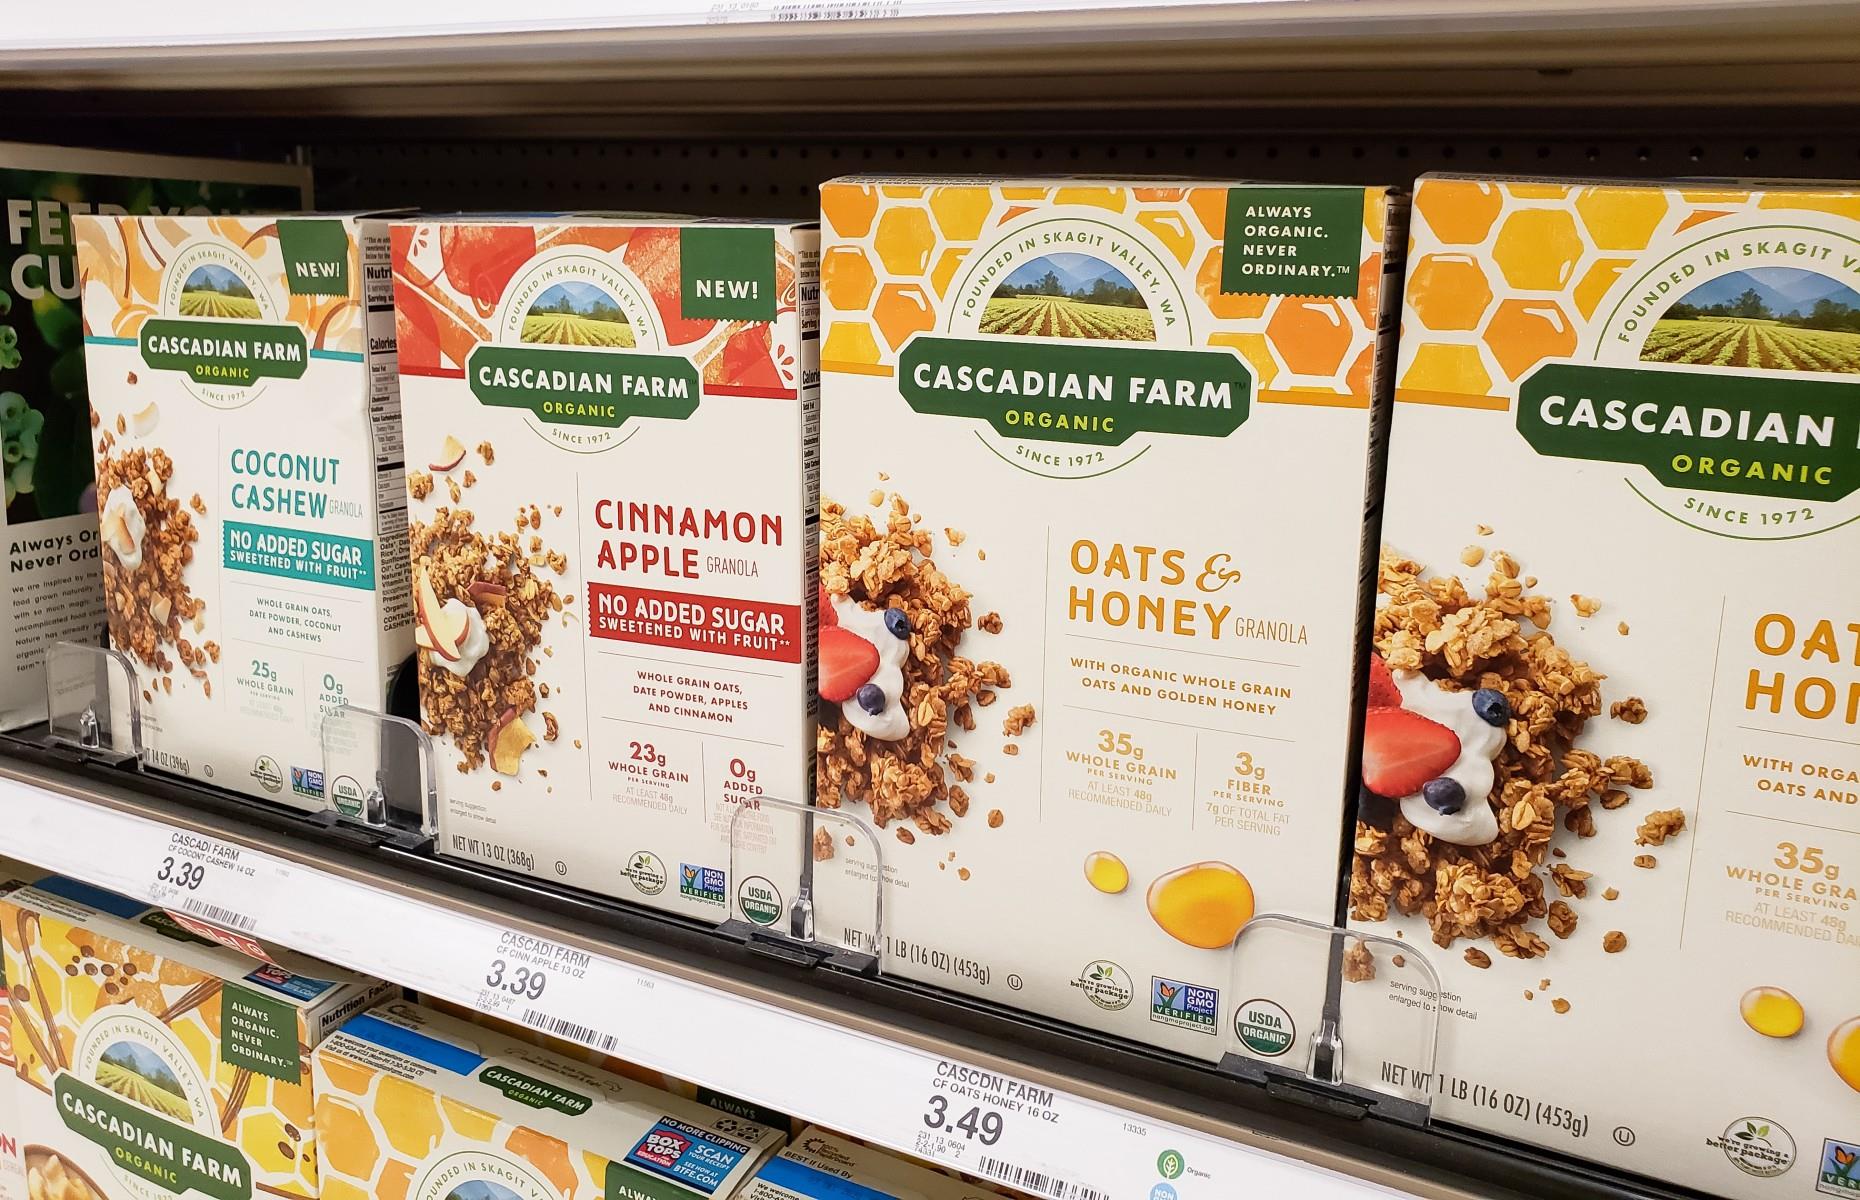 Cascadian Farm: owned by General Mills